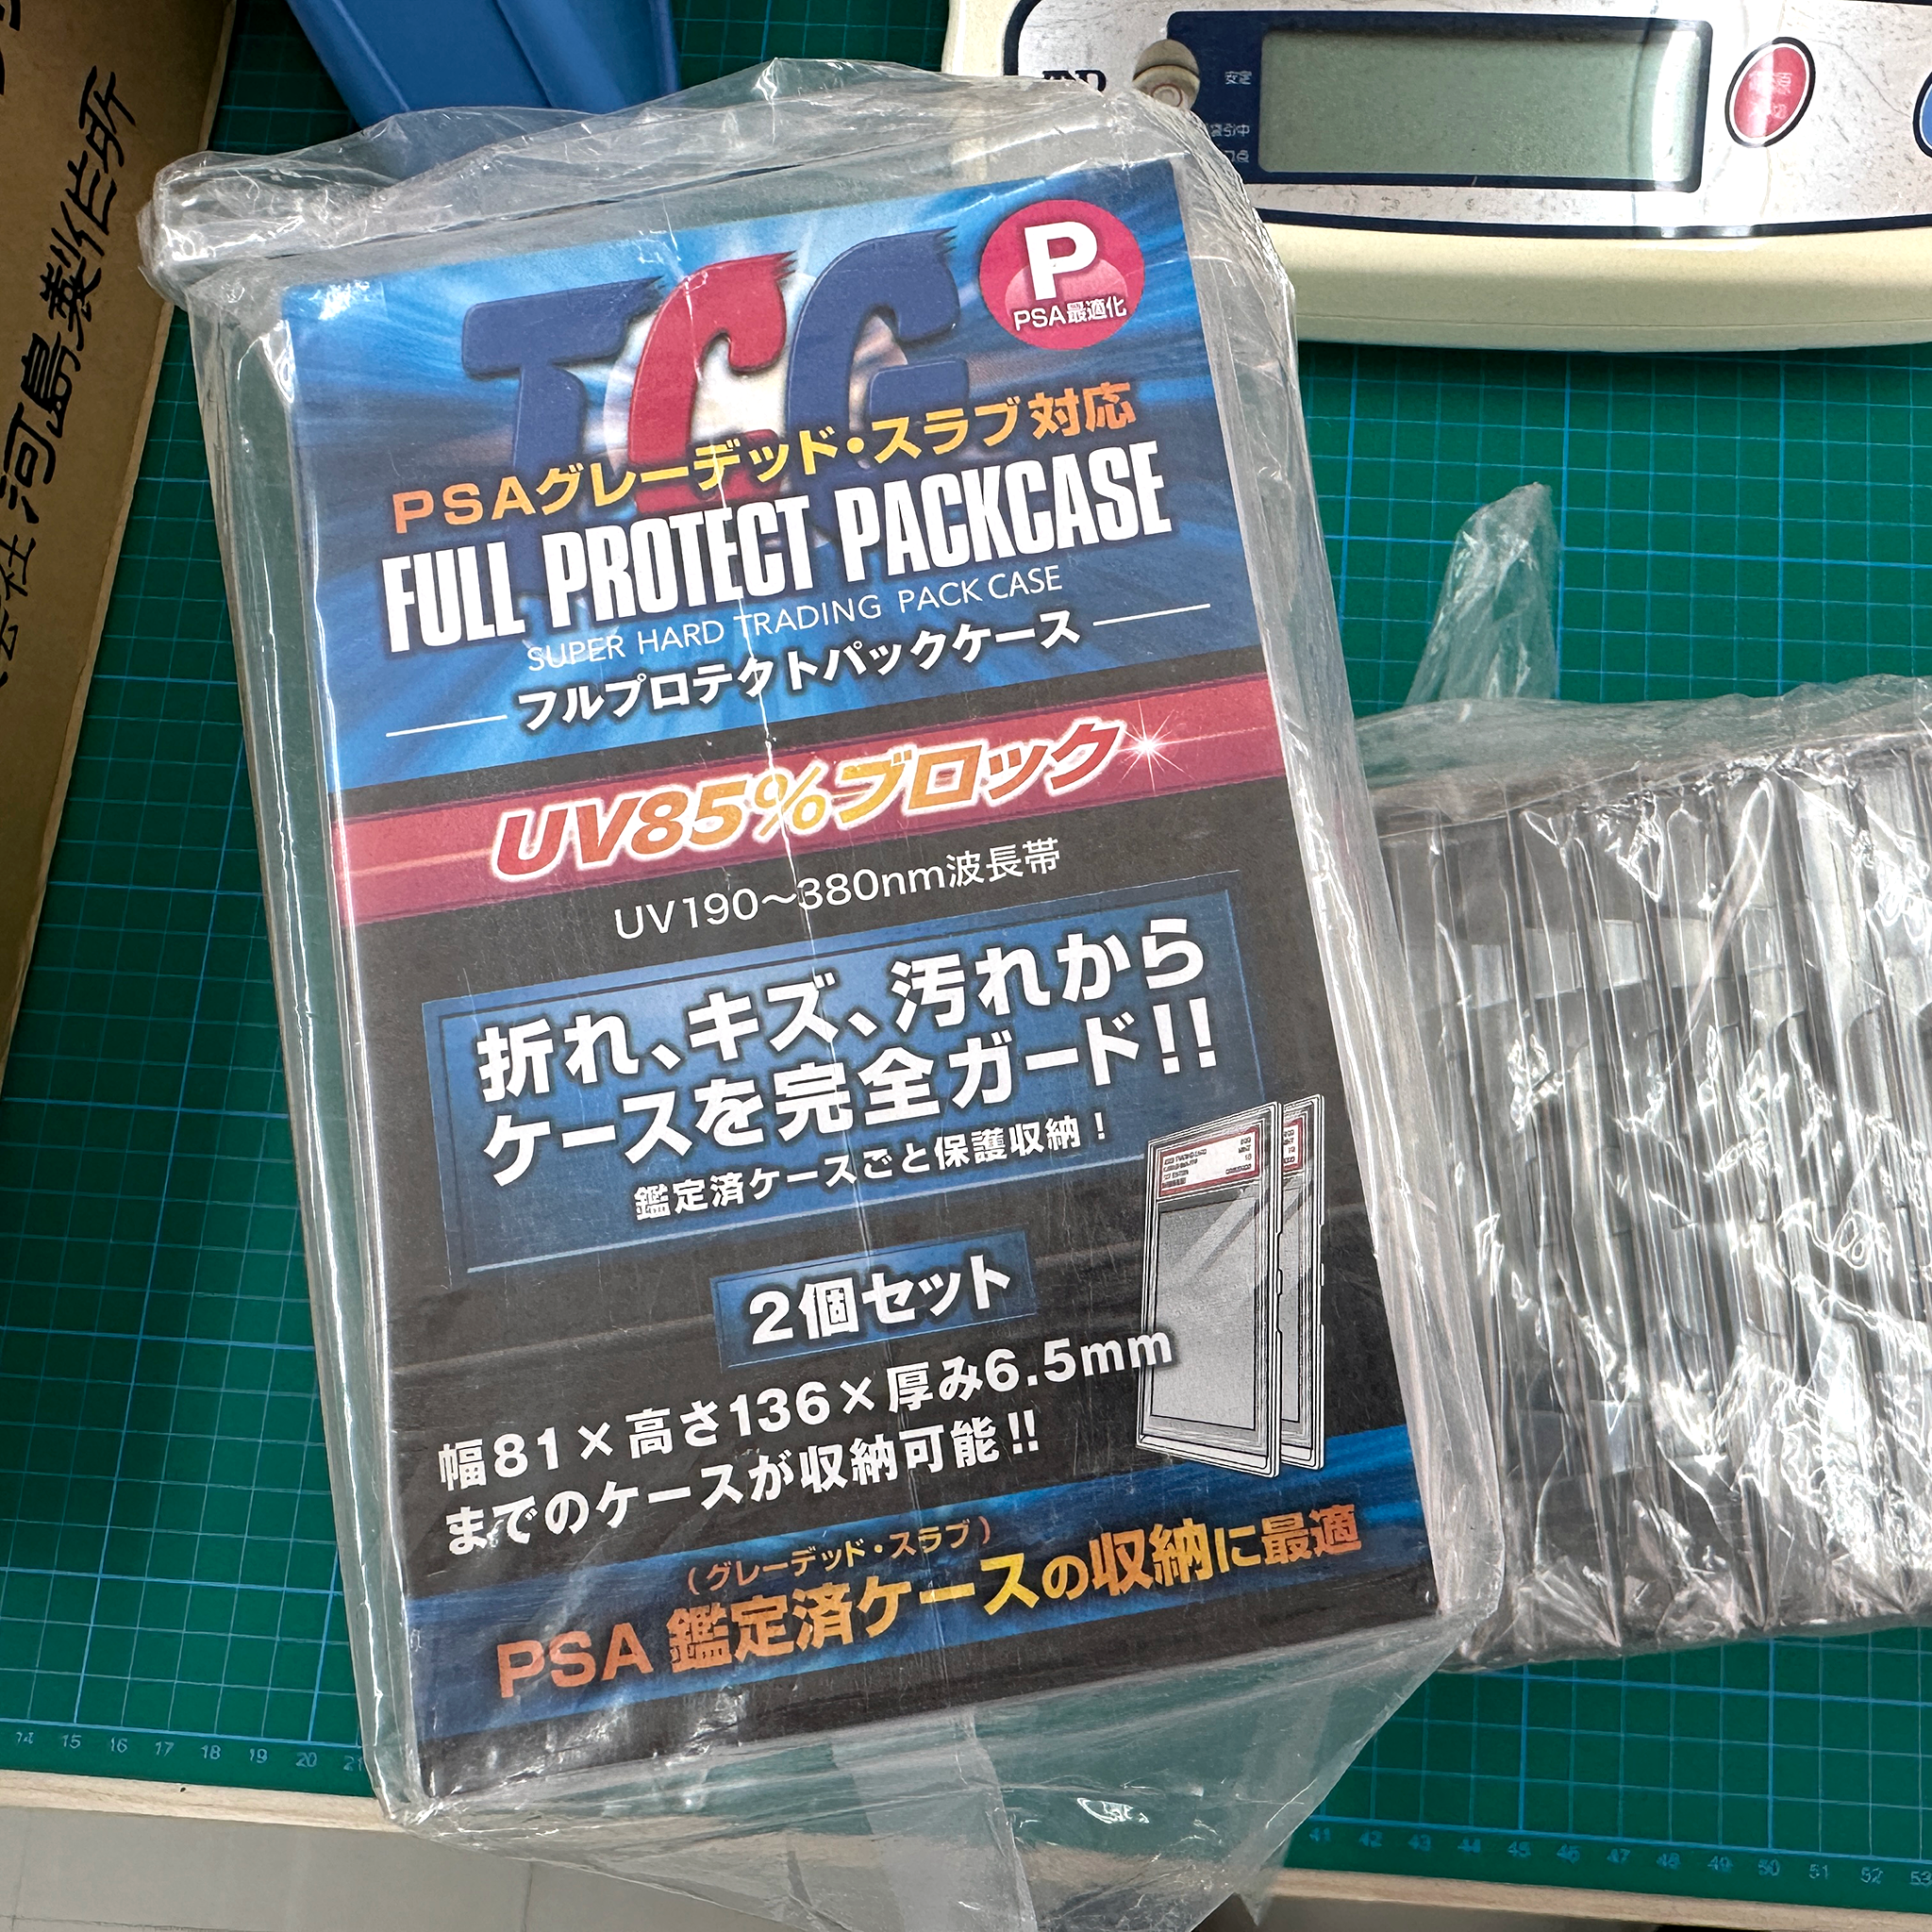 FULL PROTECT PACKCAGE SUPER HARD TRADING PACK CASE PSA size (set of 2)